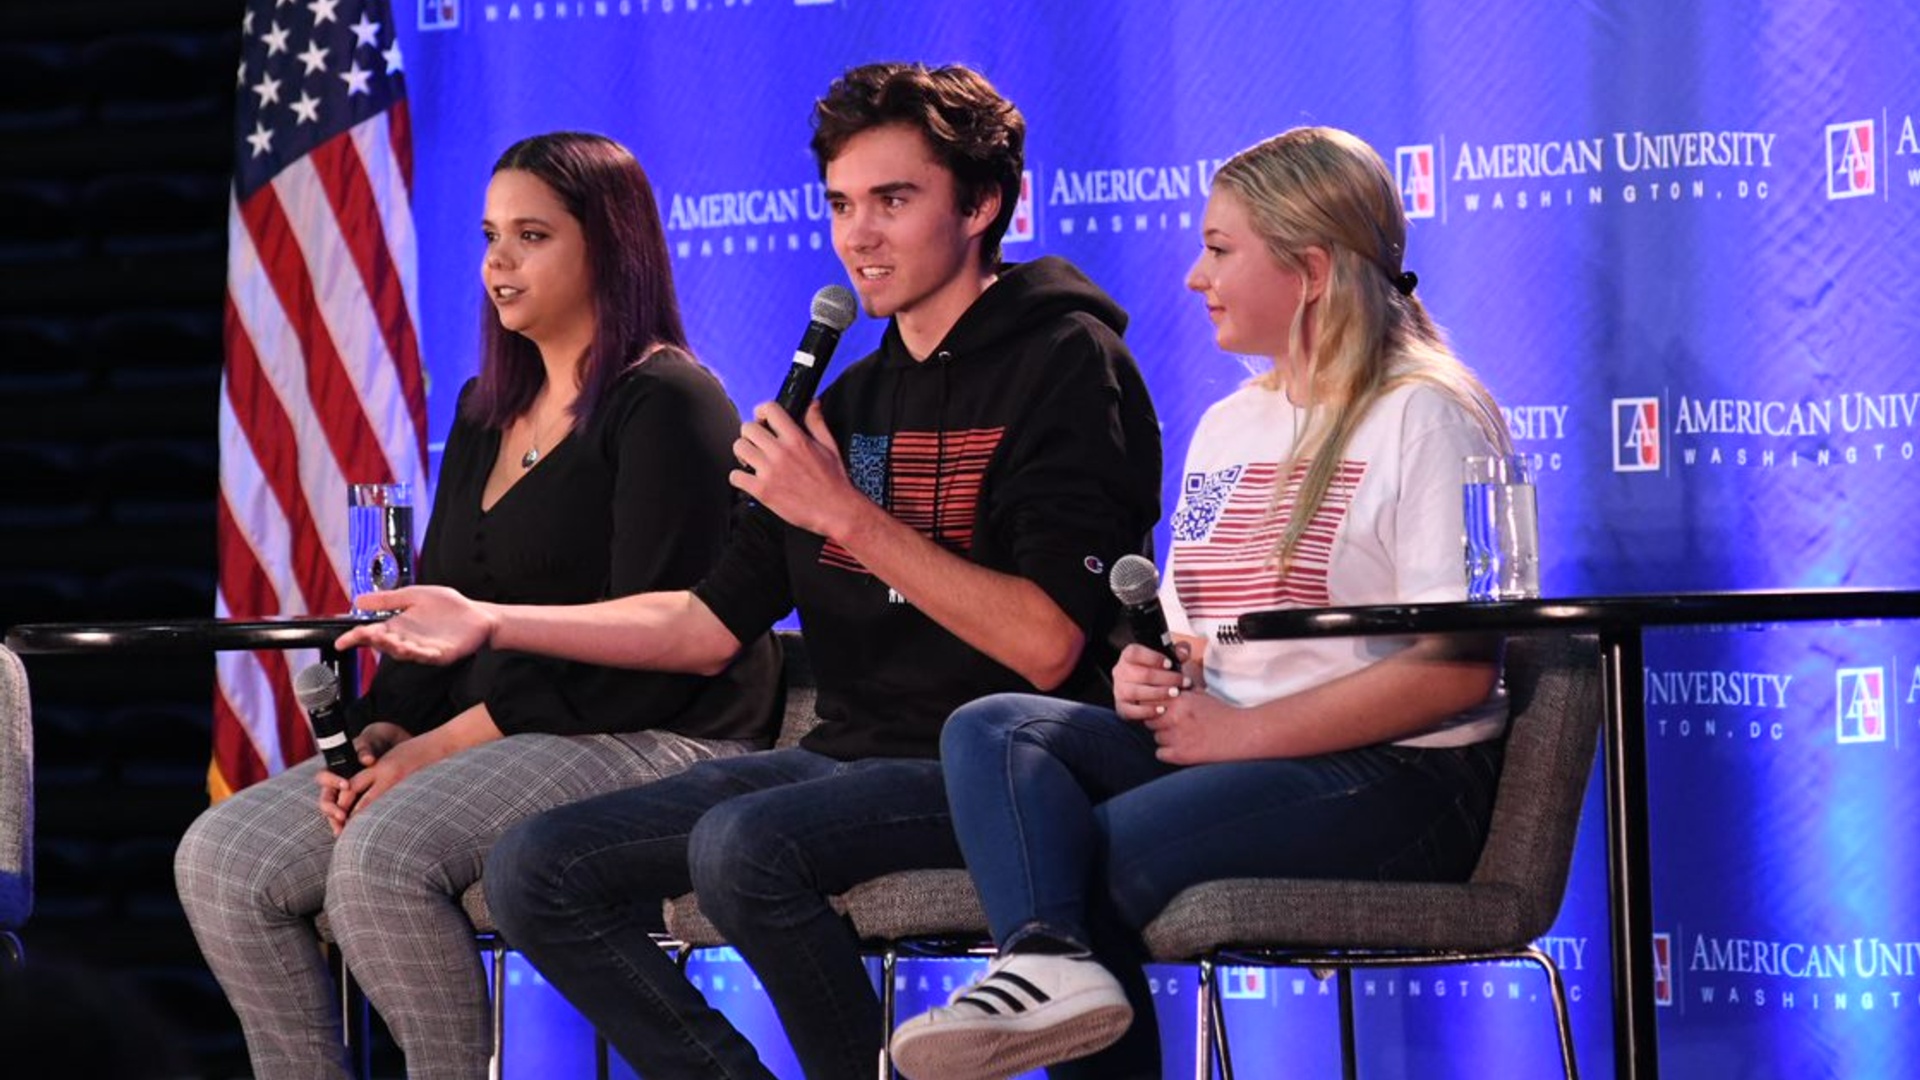 David Hogg, along with fellow Parkland survivors Samantha Fuentes and Jaclyn Corin, speak to the AU community about voting, gun law reform, and mobilizing for change.